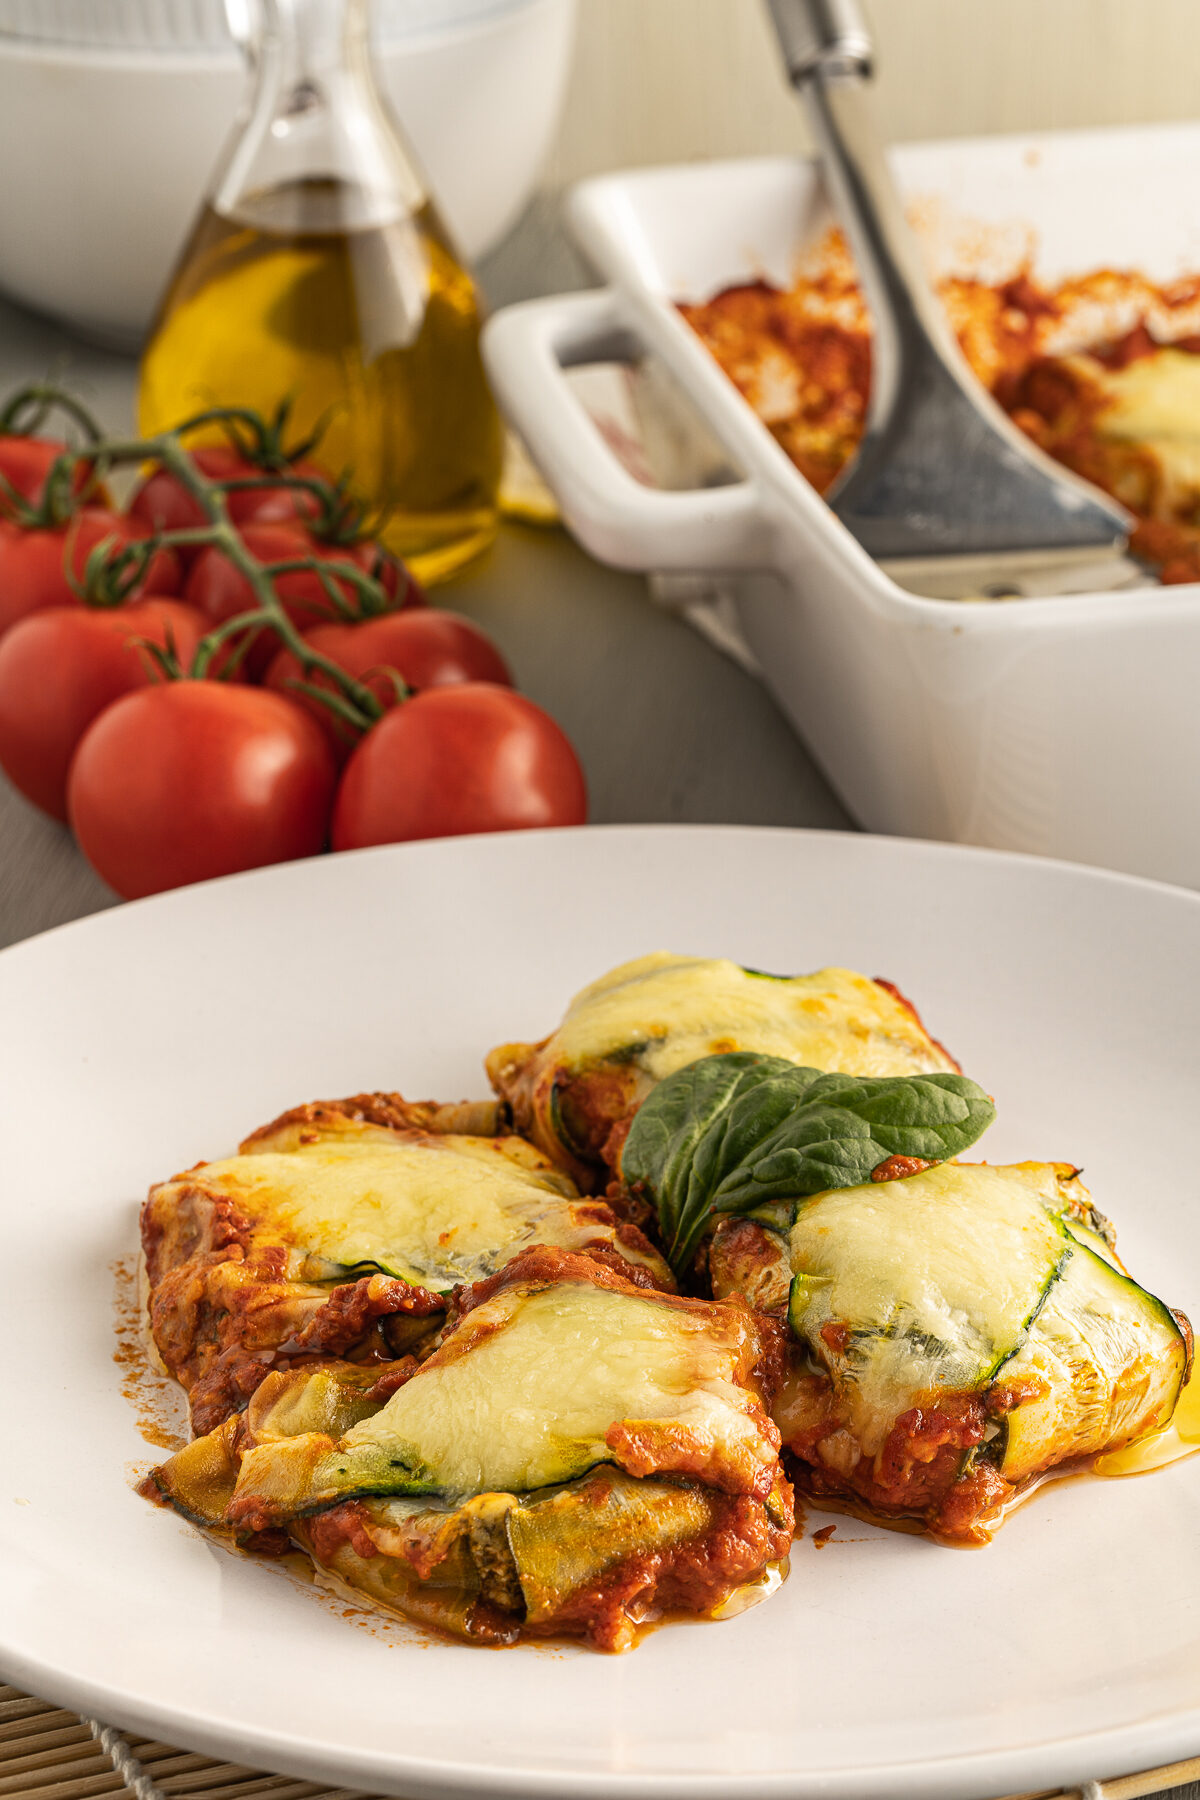 Zucchini ravioli is an easy to make Keto friendly family meal. Filled with cheese and spinach, it's a satisfying & tasty vegetarian dish!